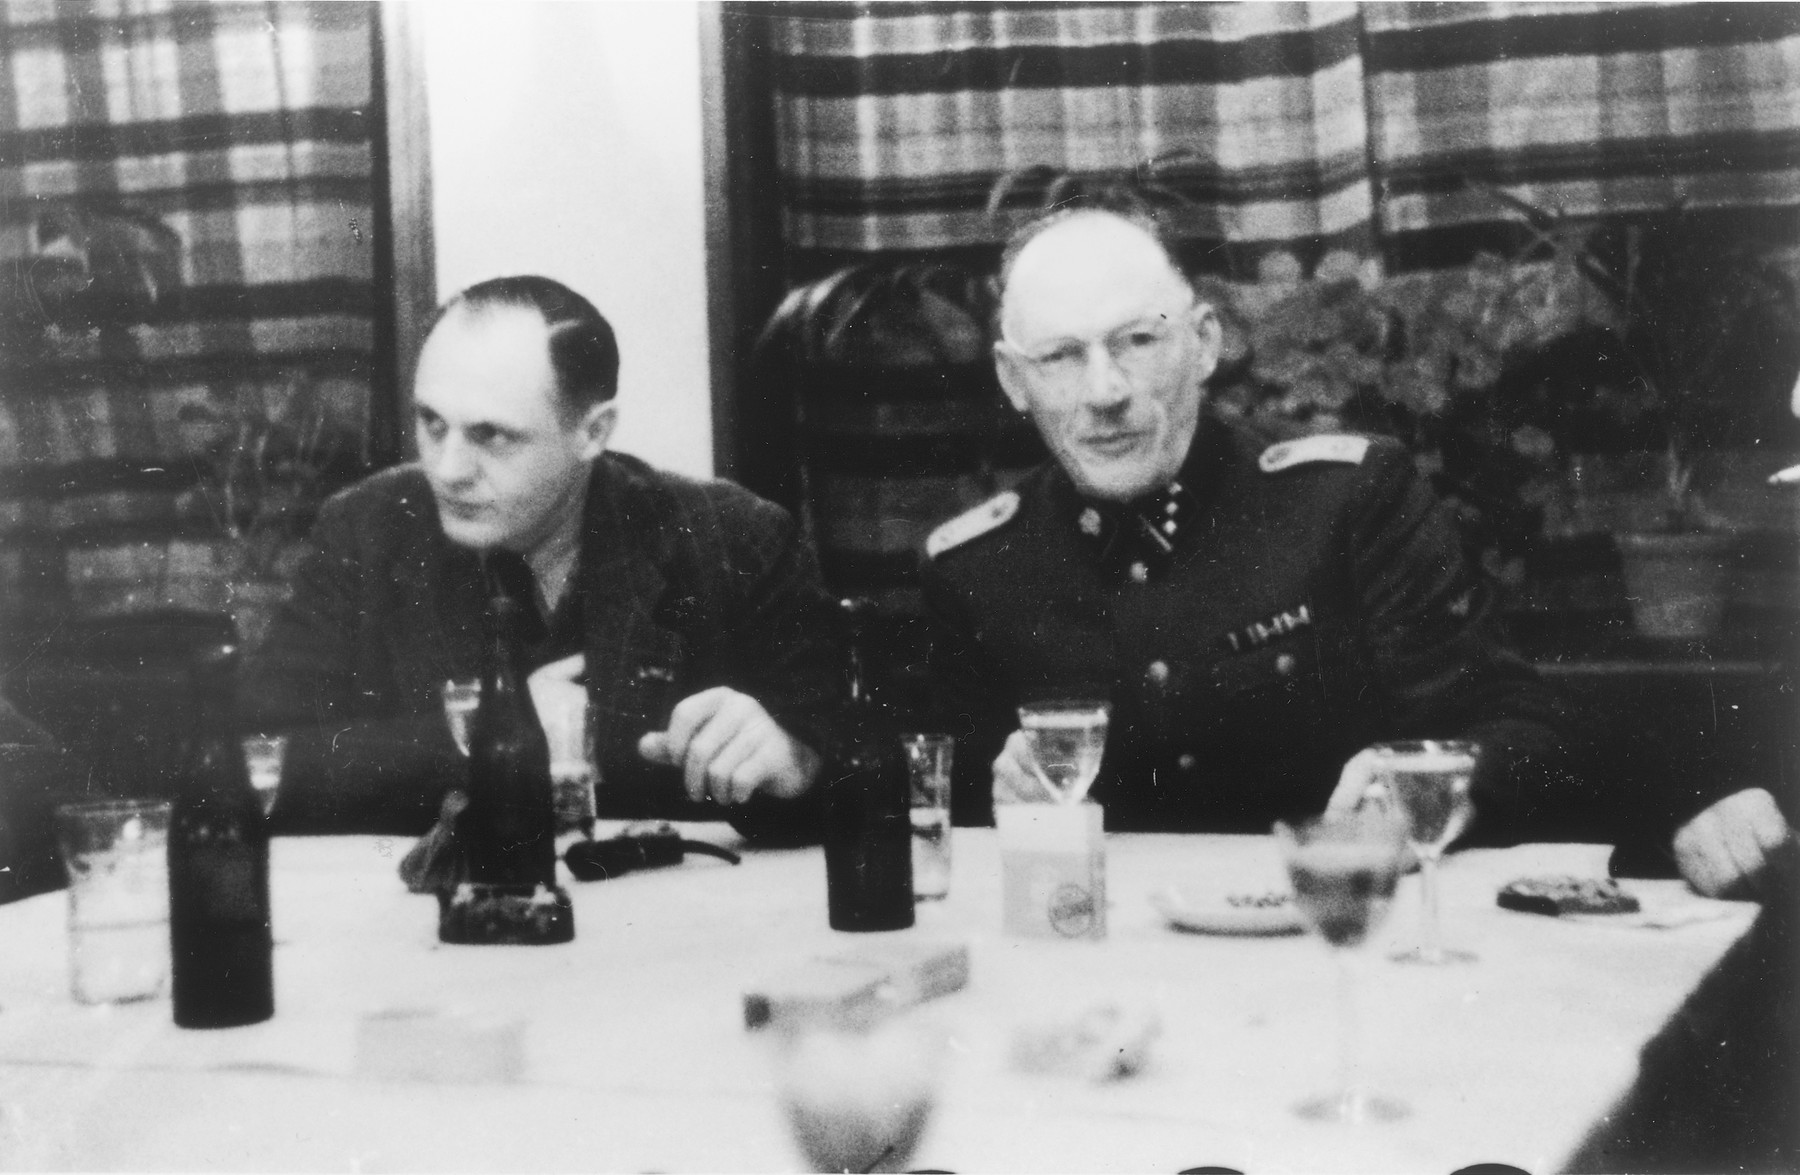 Two SS officers gather for drinks in a hunting lodge.

From left to right are Dr. Eduard Wirths and Heinrich Josten.